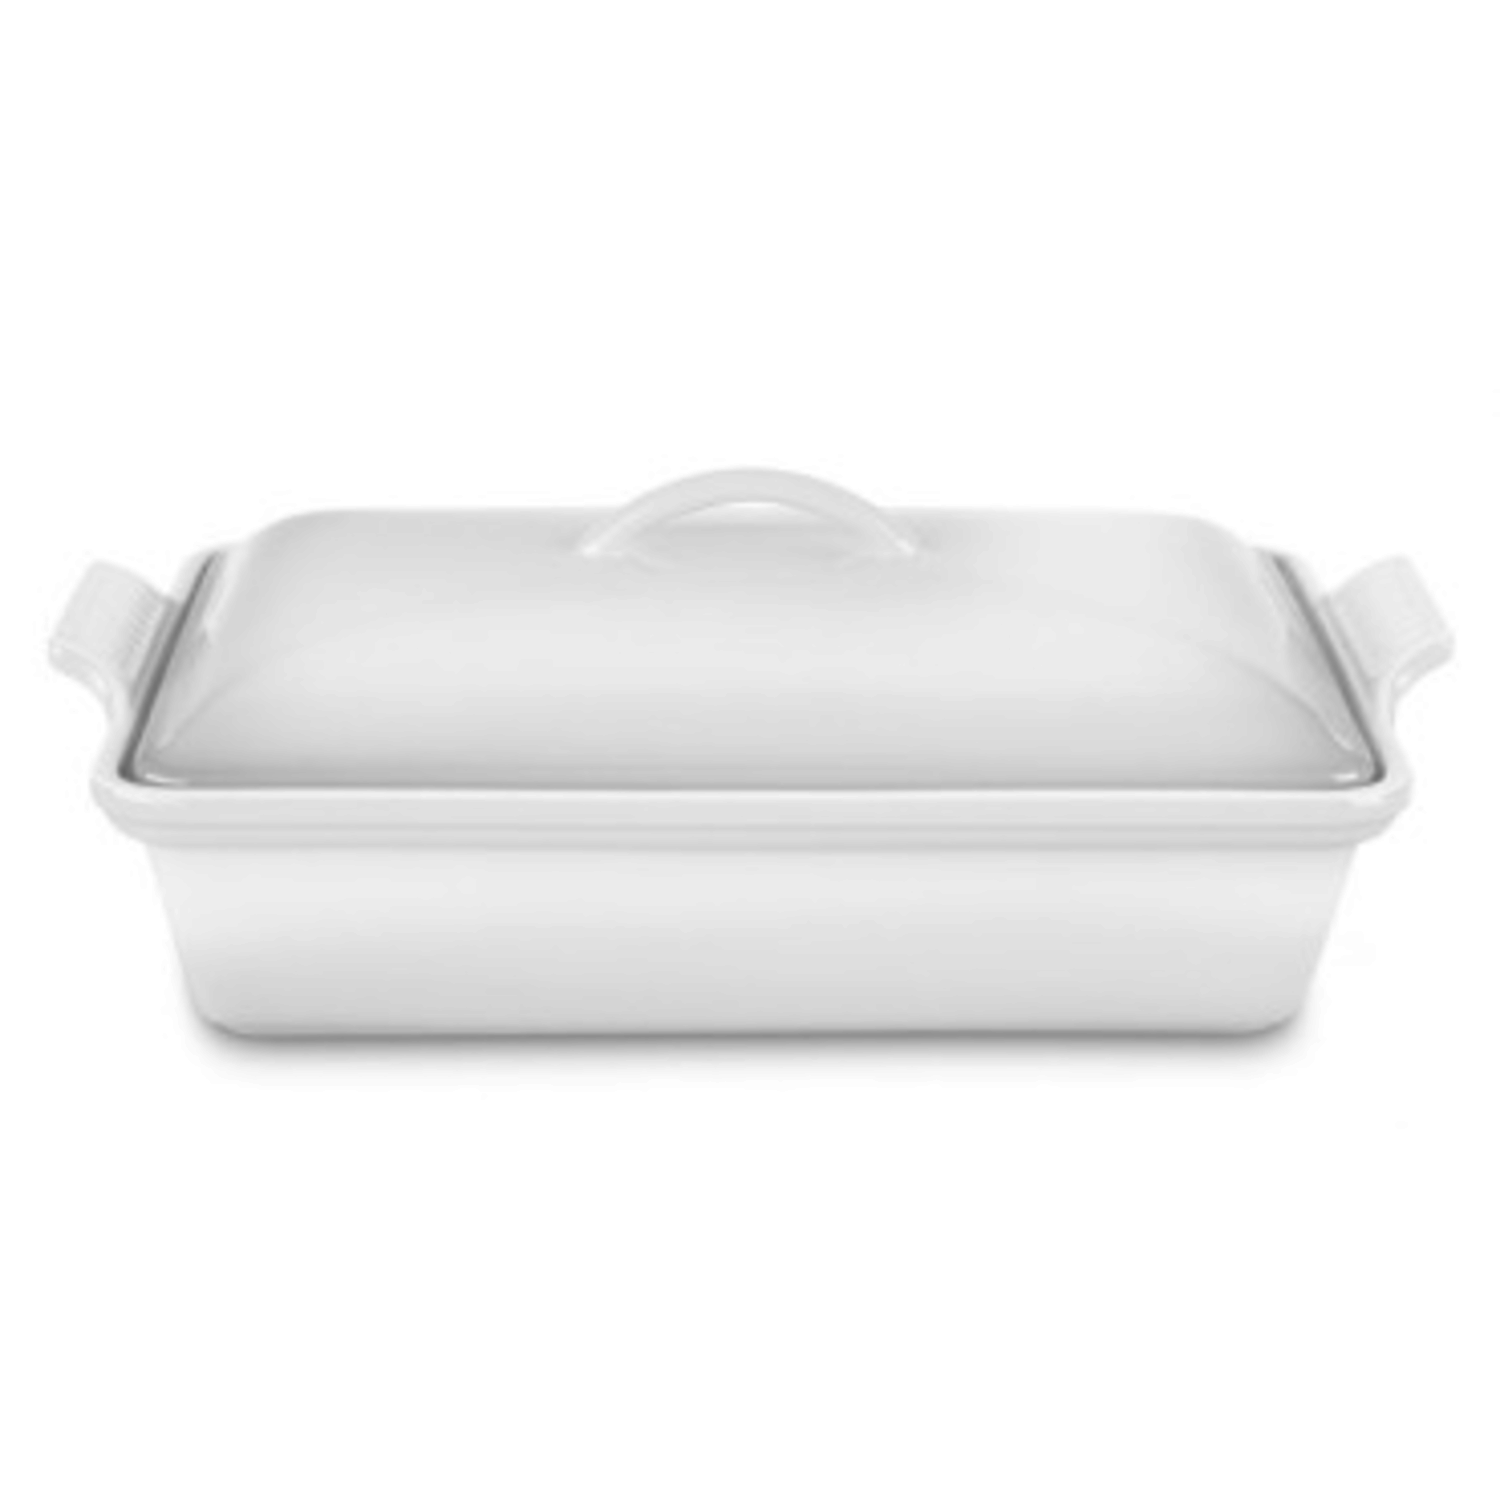 Le Creuset Roasting Pan with Lid (never used) - household items